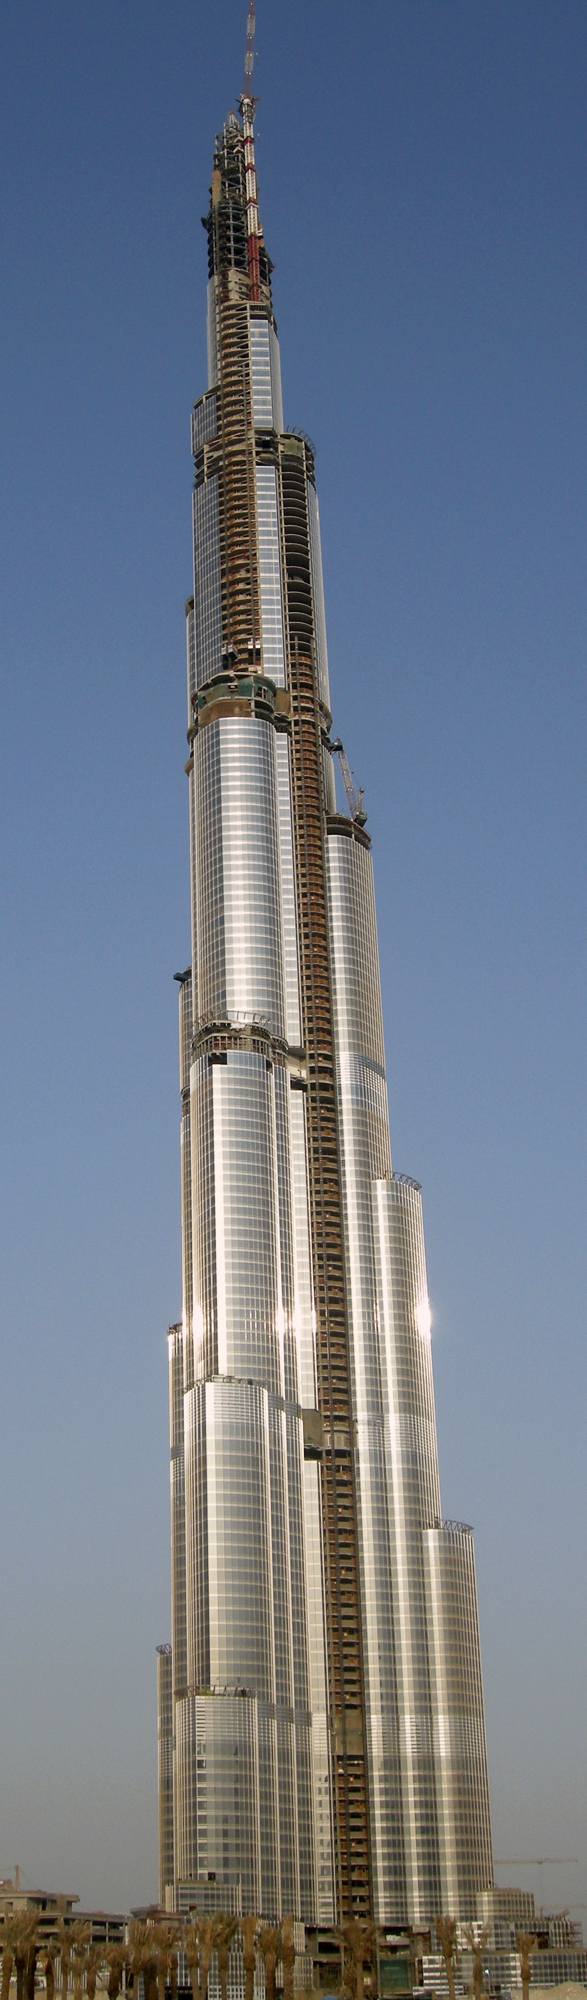 Borg Dubai, the tallest skyscraper in the world, pictured in August 2008, standing at a reported non-official height of 818 m, consisting of 162 floors above ground and described as the 'Jewel of the Gulf Region,' was a symbol of Dubai building boom that comes to an end and resulted in a large financial meltdown, November 2009.